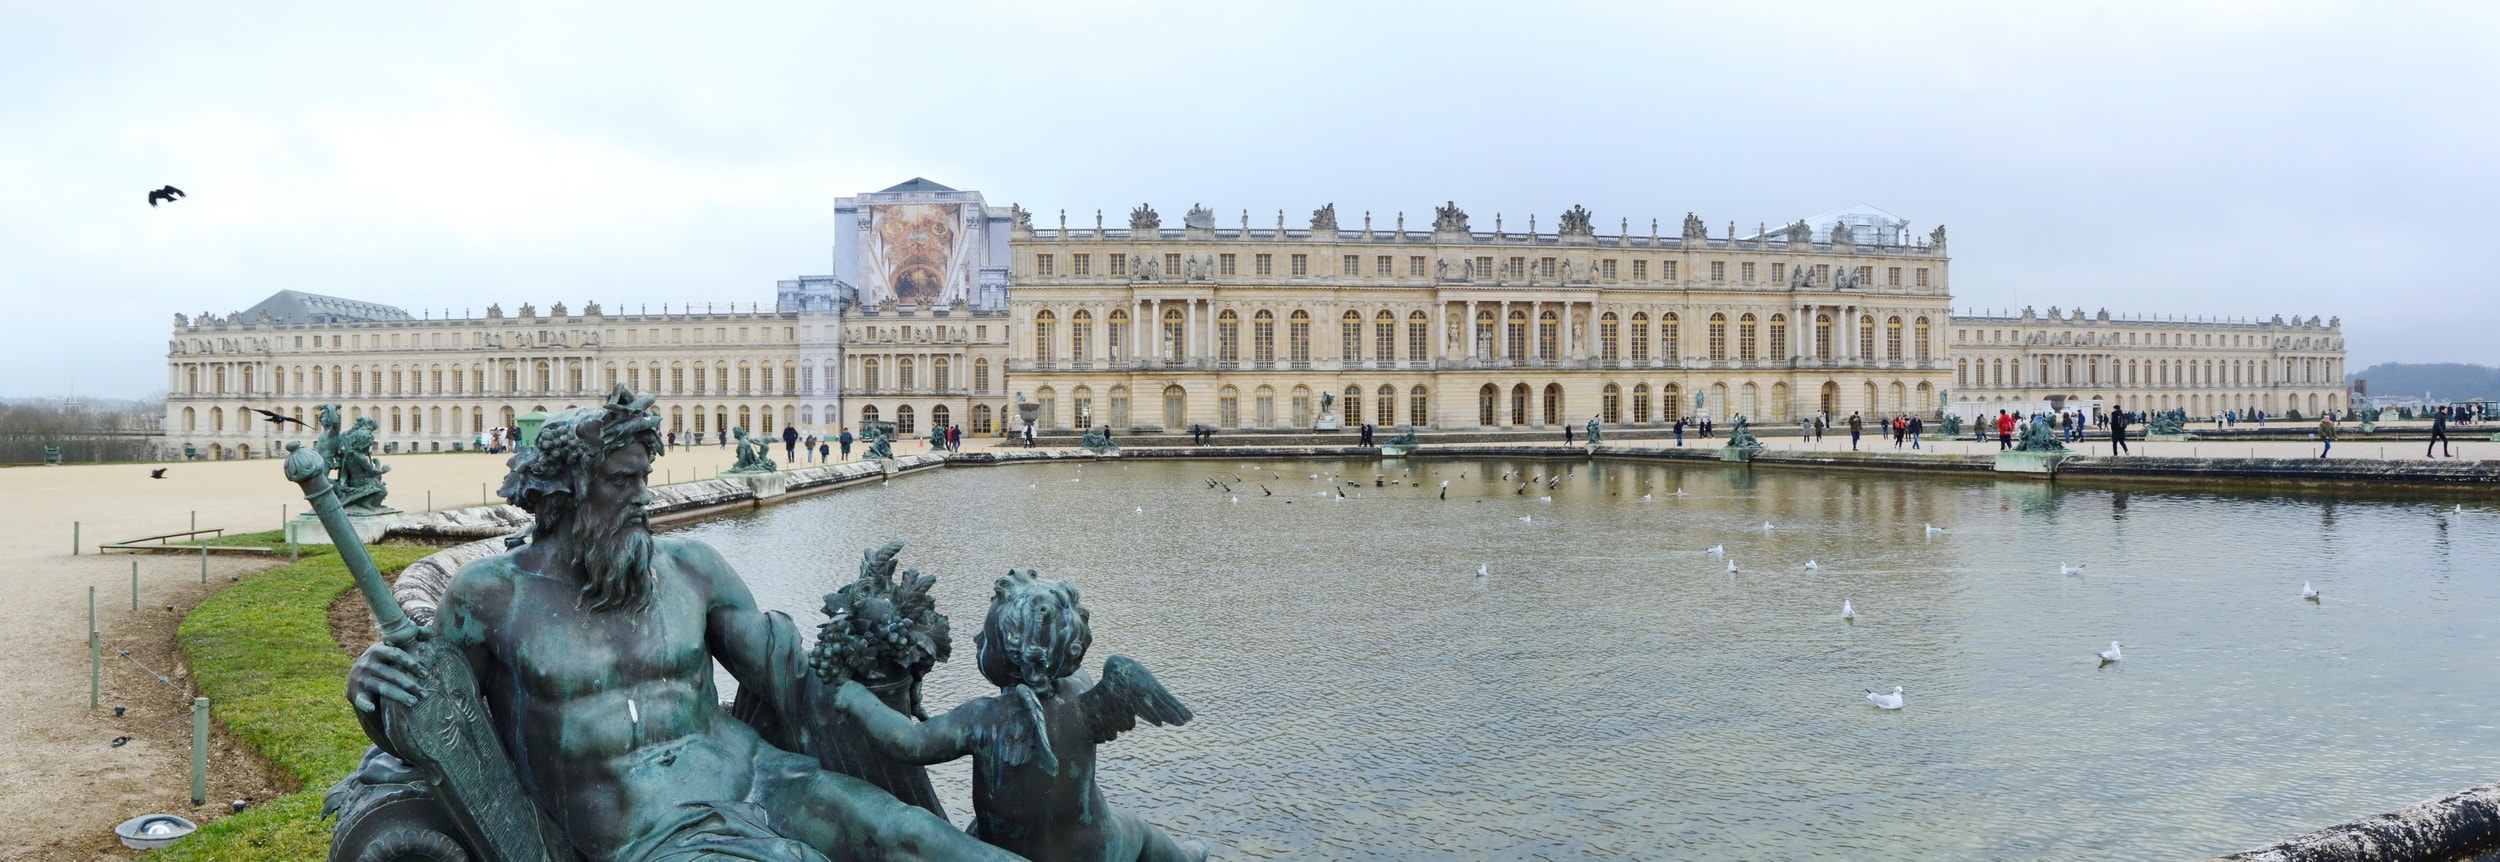 The Palace of Versailles, looking from the gardens